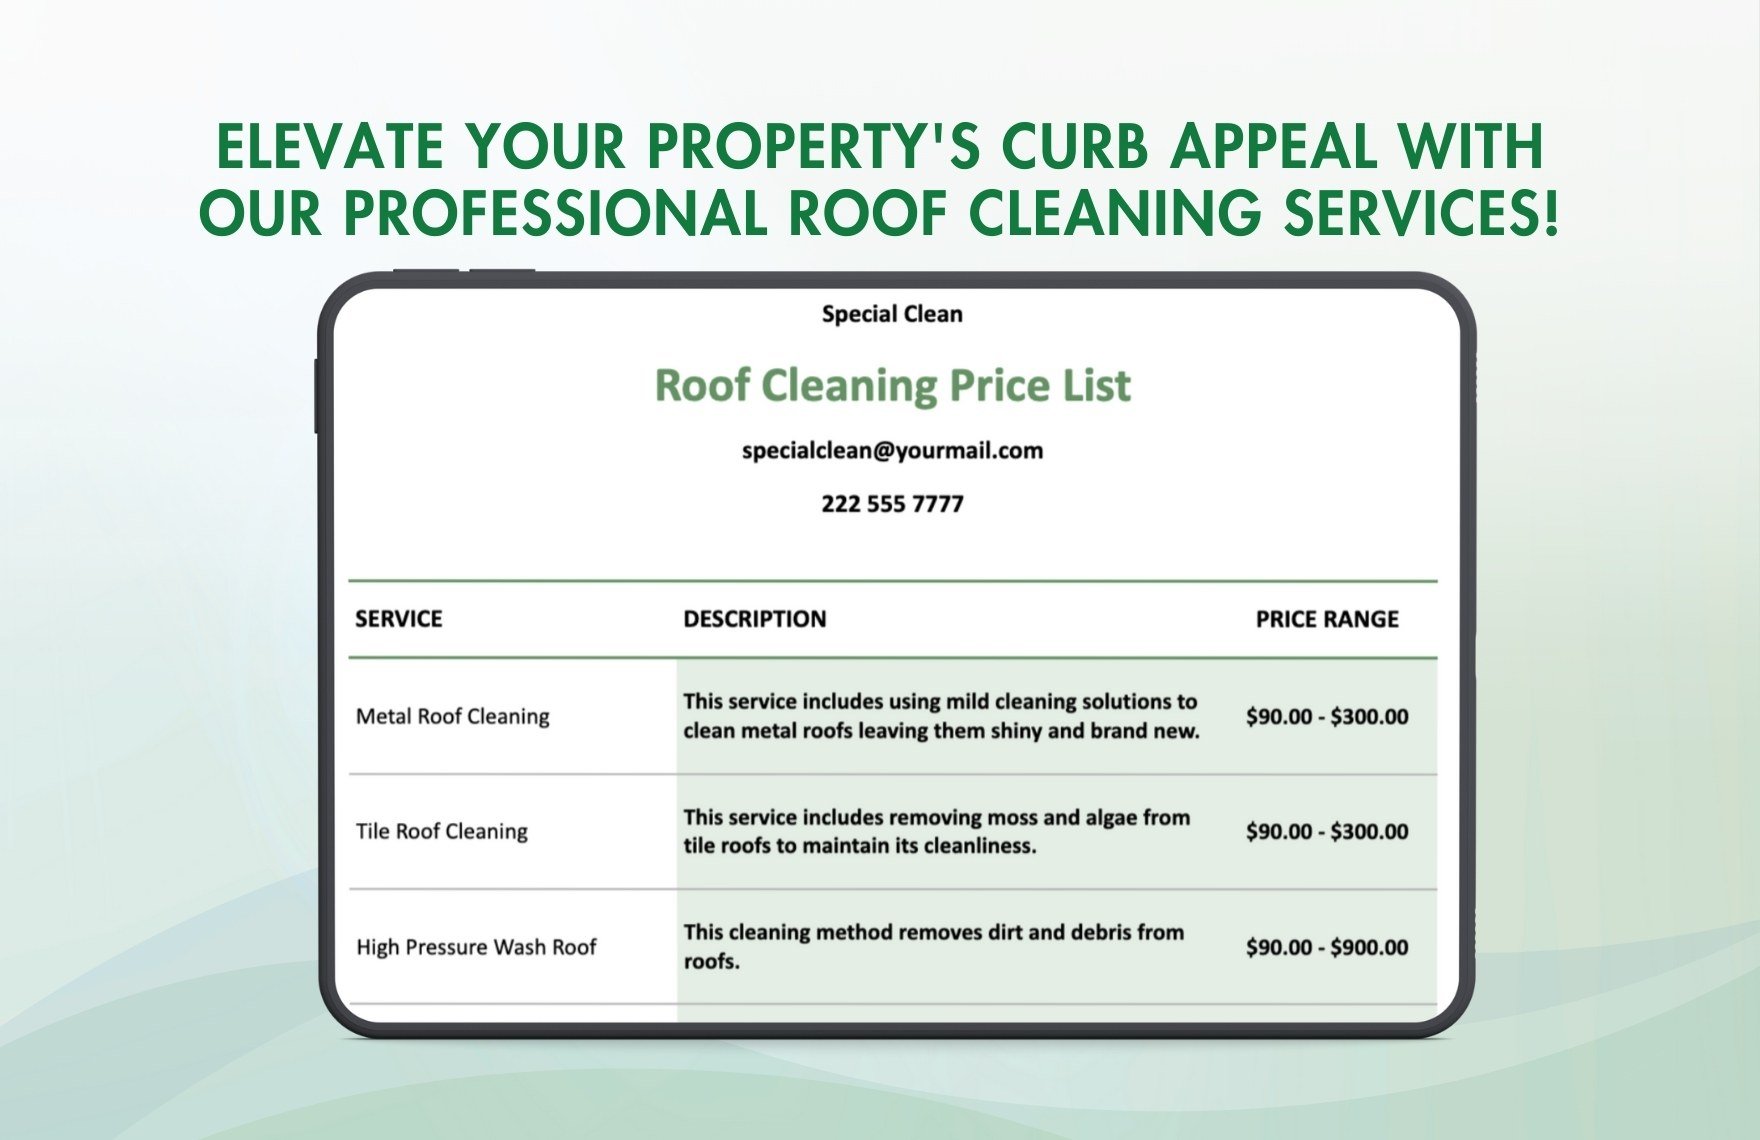 Roof Cleaning Price List Template